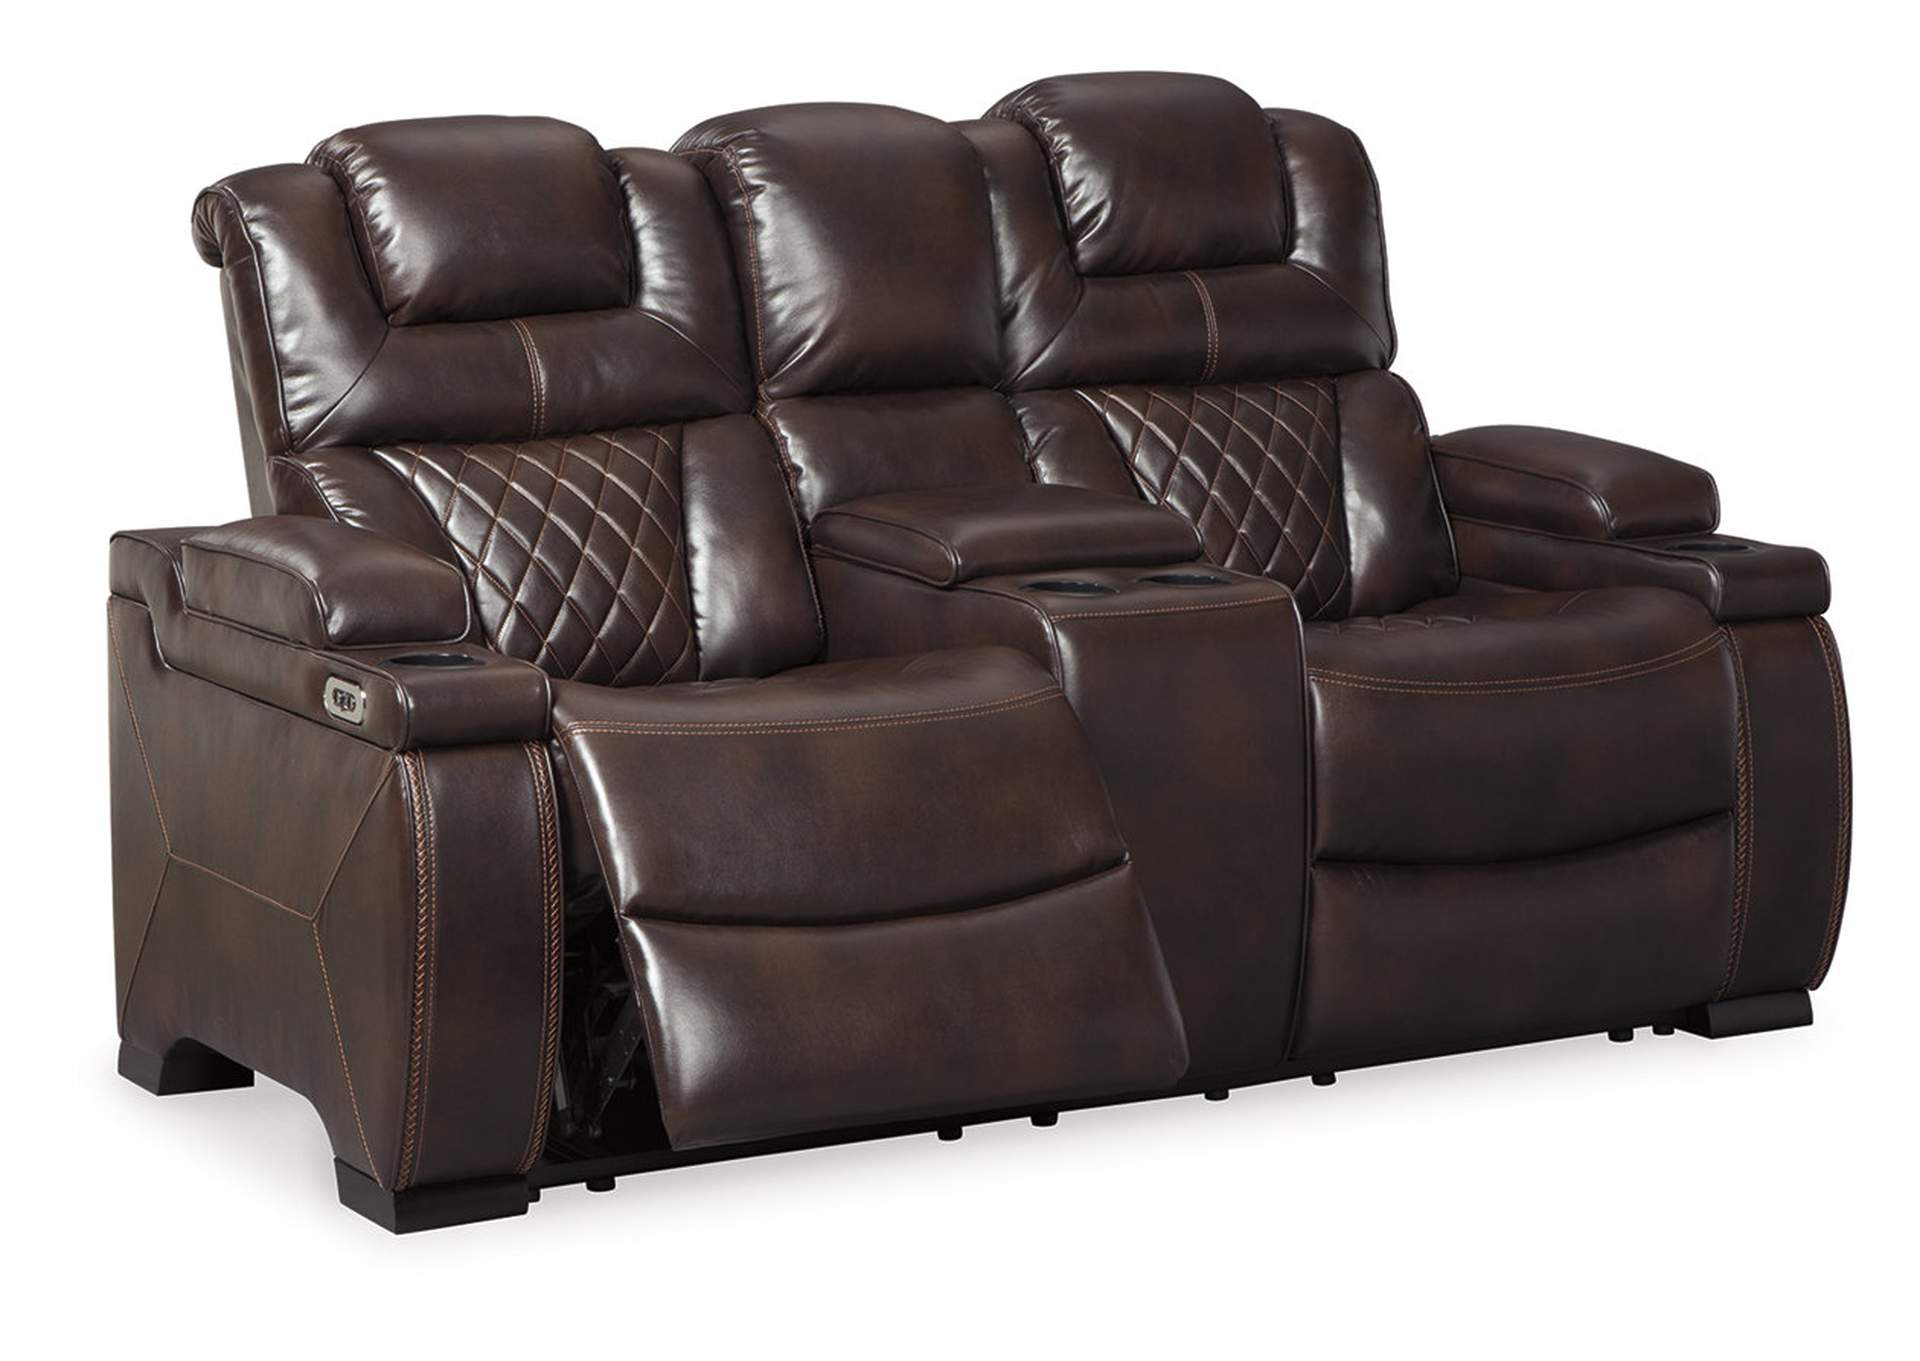 Warnerton Power Reclining Loveseat with Console,Signature Design By Ashley